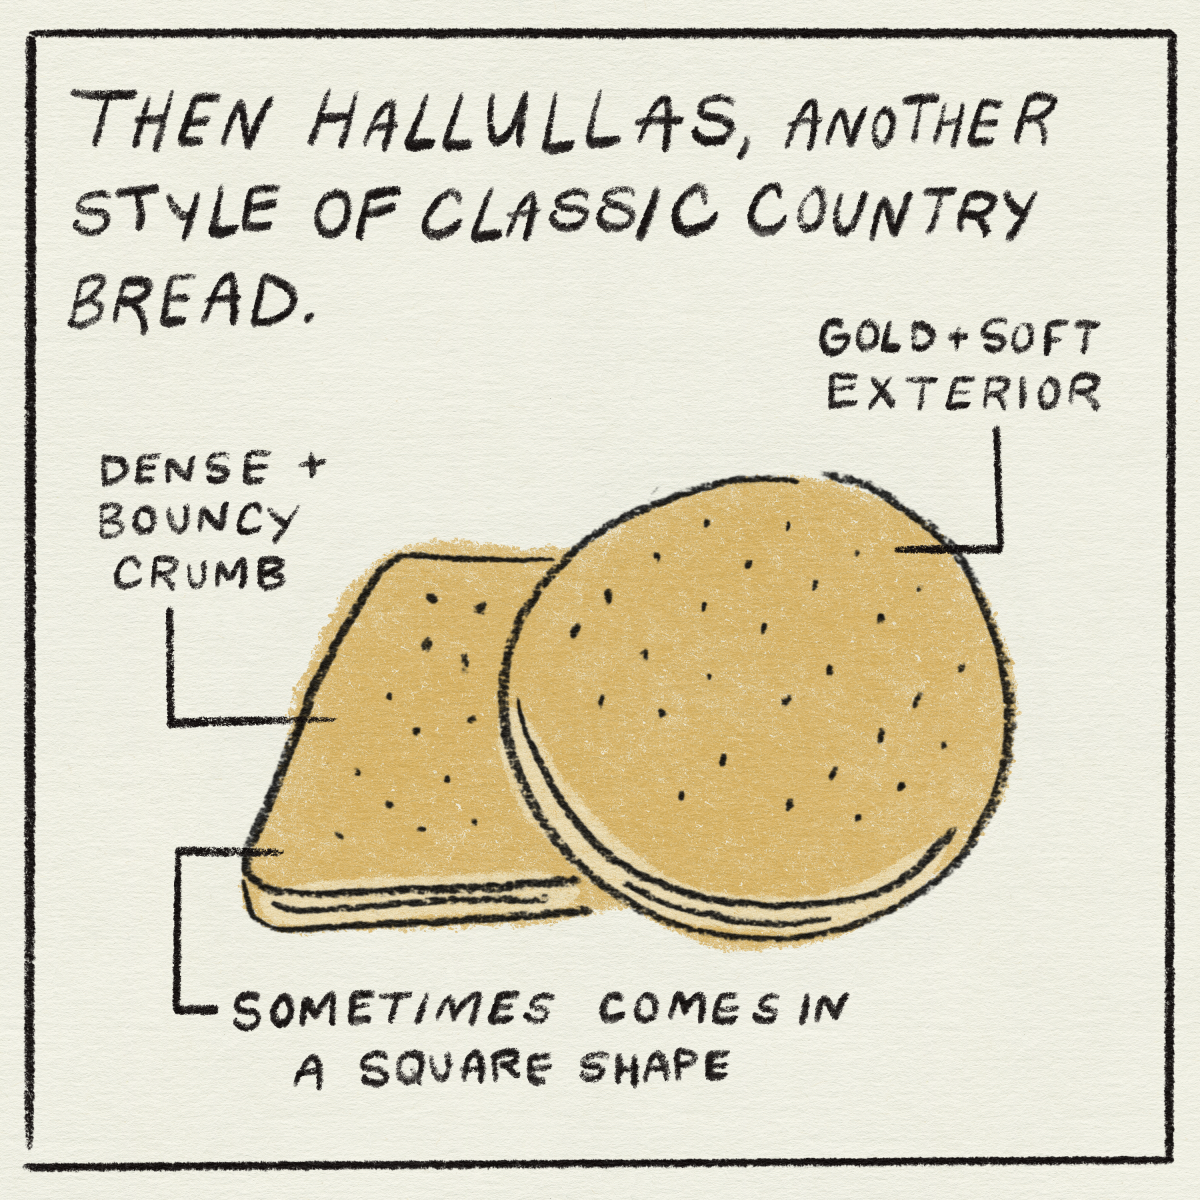 Then hallullas, another style of classic country bread." "Dense + bouncy crumb, gold + soft exterior"